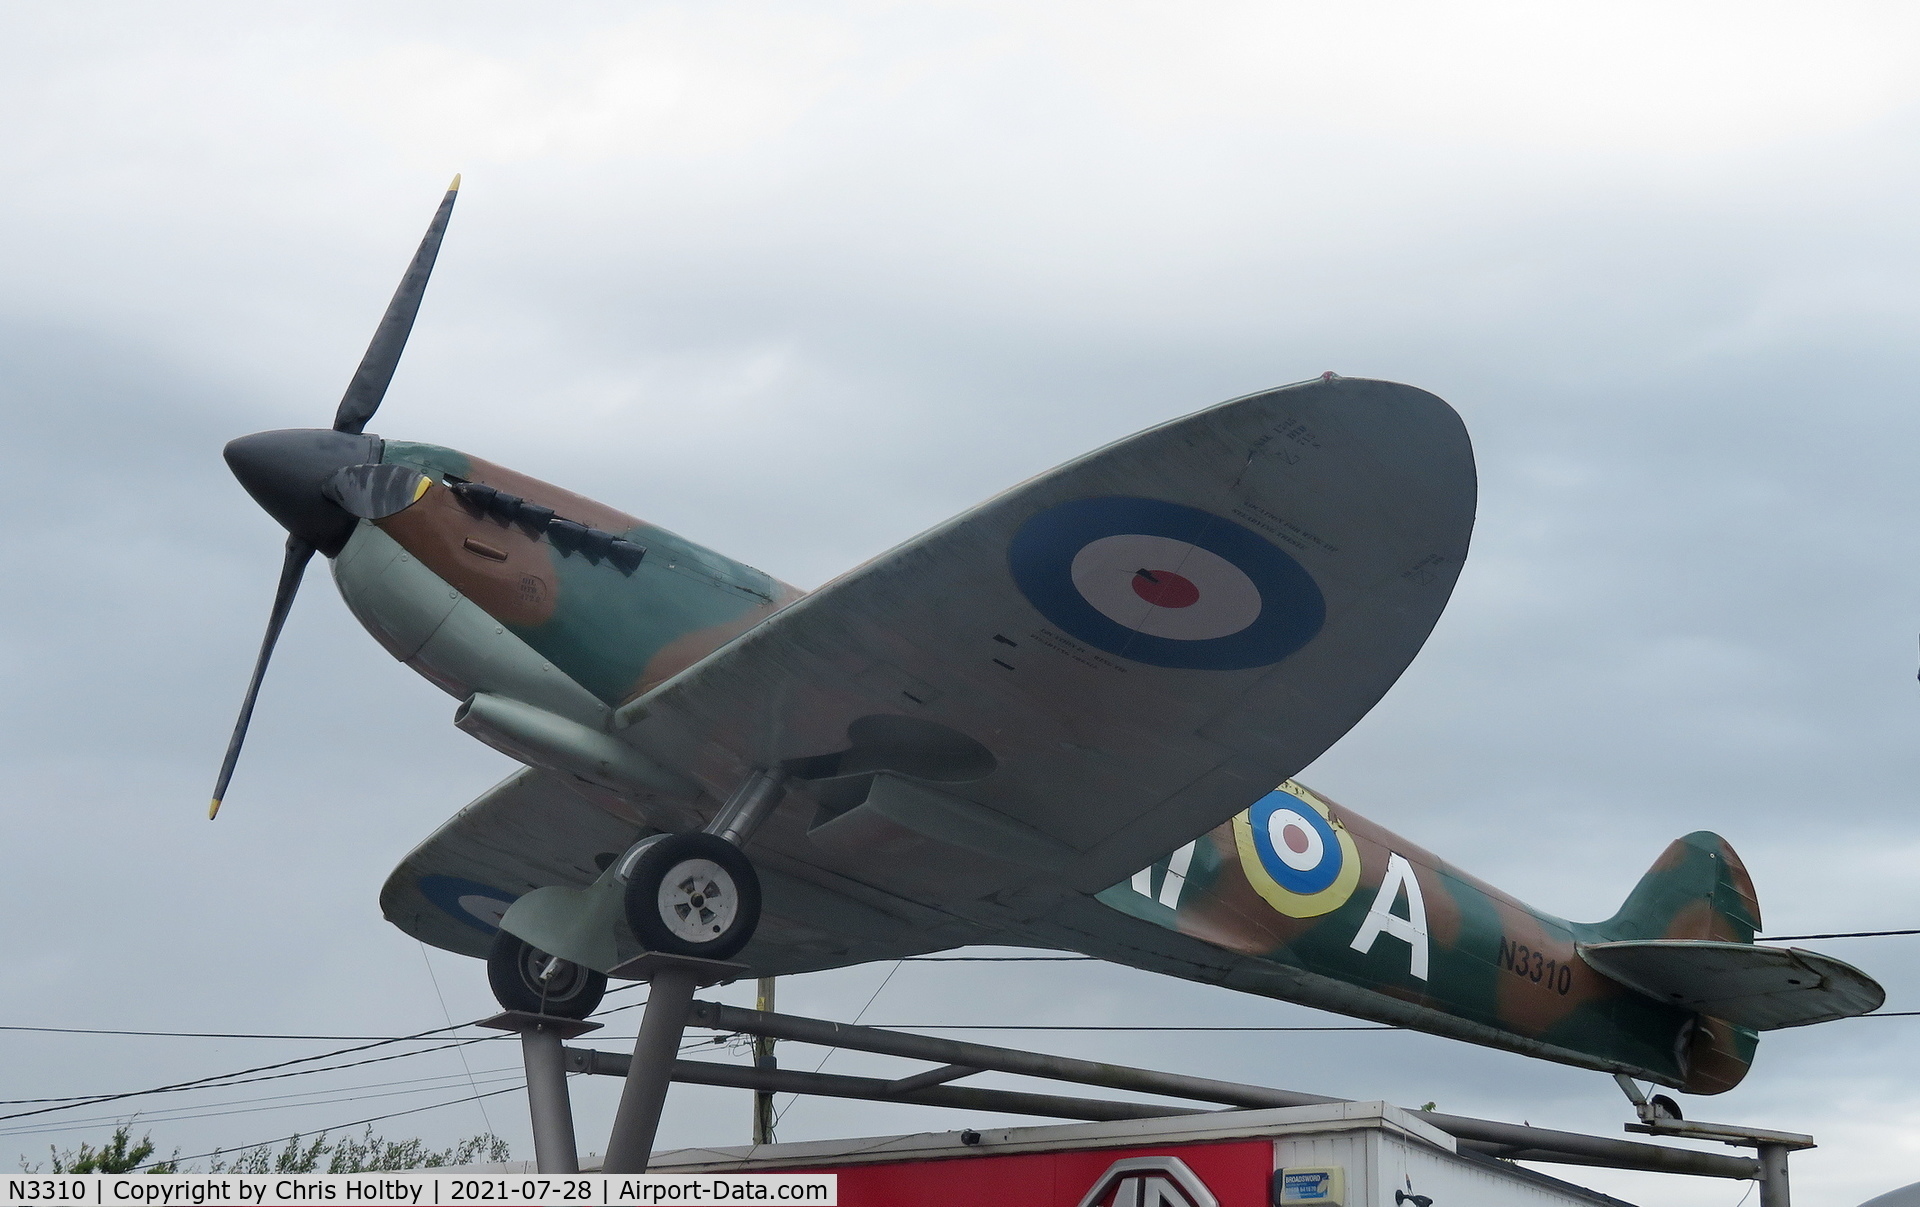 N3310, Supermarine 361 Spitfire IX Replica C/N Not found, Preserved replica built for the 1969 film The Battle of Britain on the forecourt of Lodge Hill MG Motor dealer in Abingdon, privately owned by Peter Jewson to commemorate women pilots in the Battle of Britain.